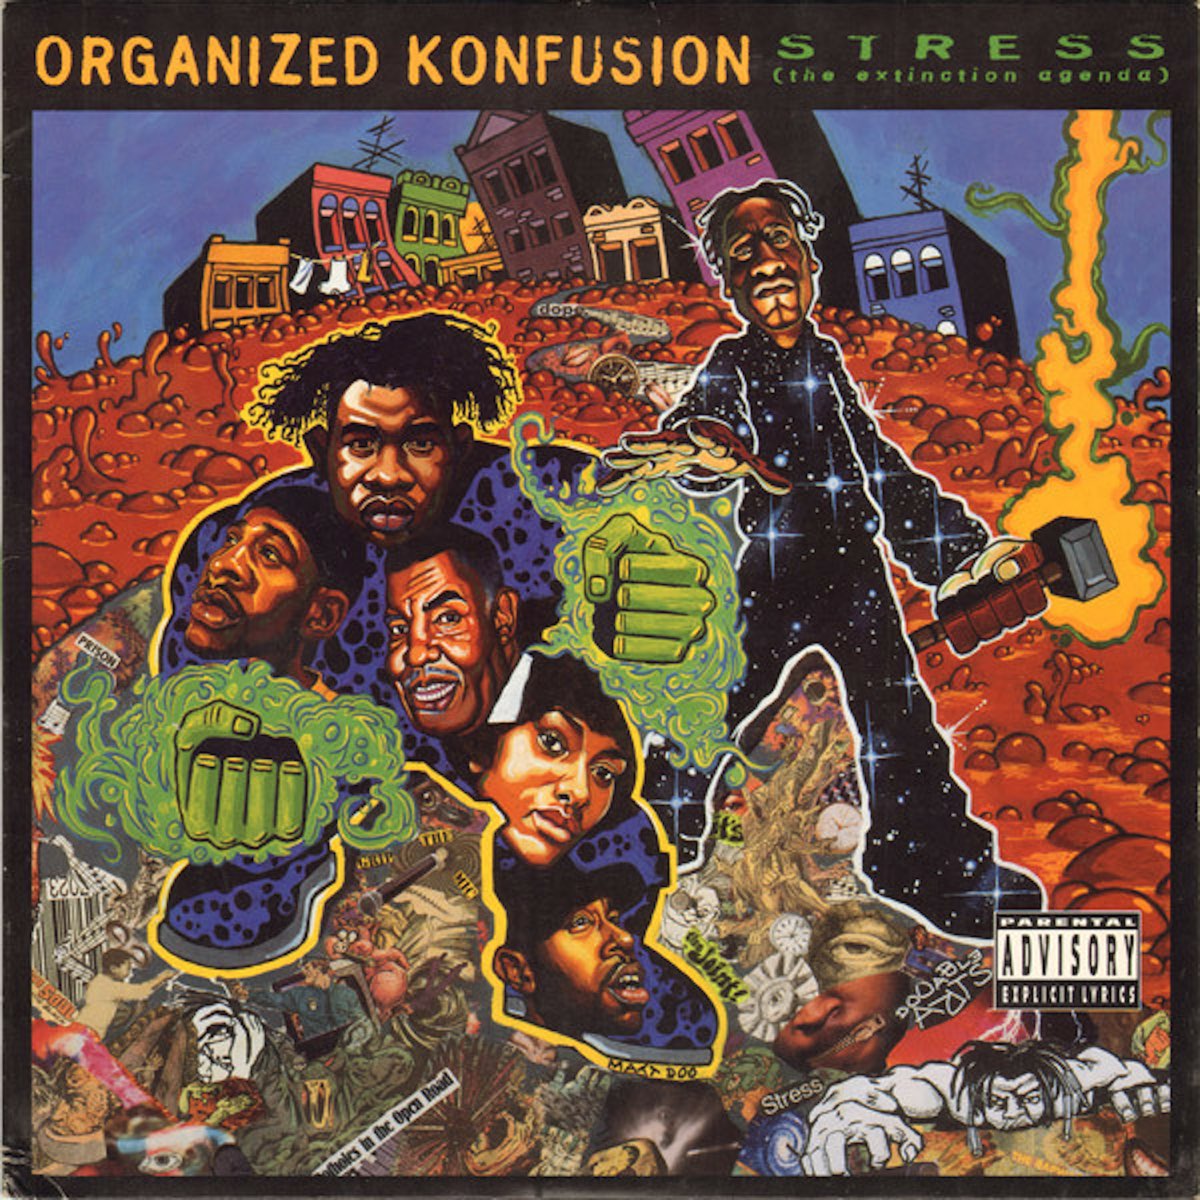 Organized Konfusion - 'Stress' [Ringtone for Android]